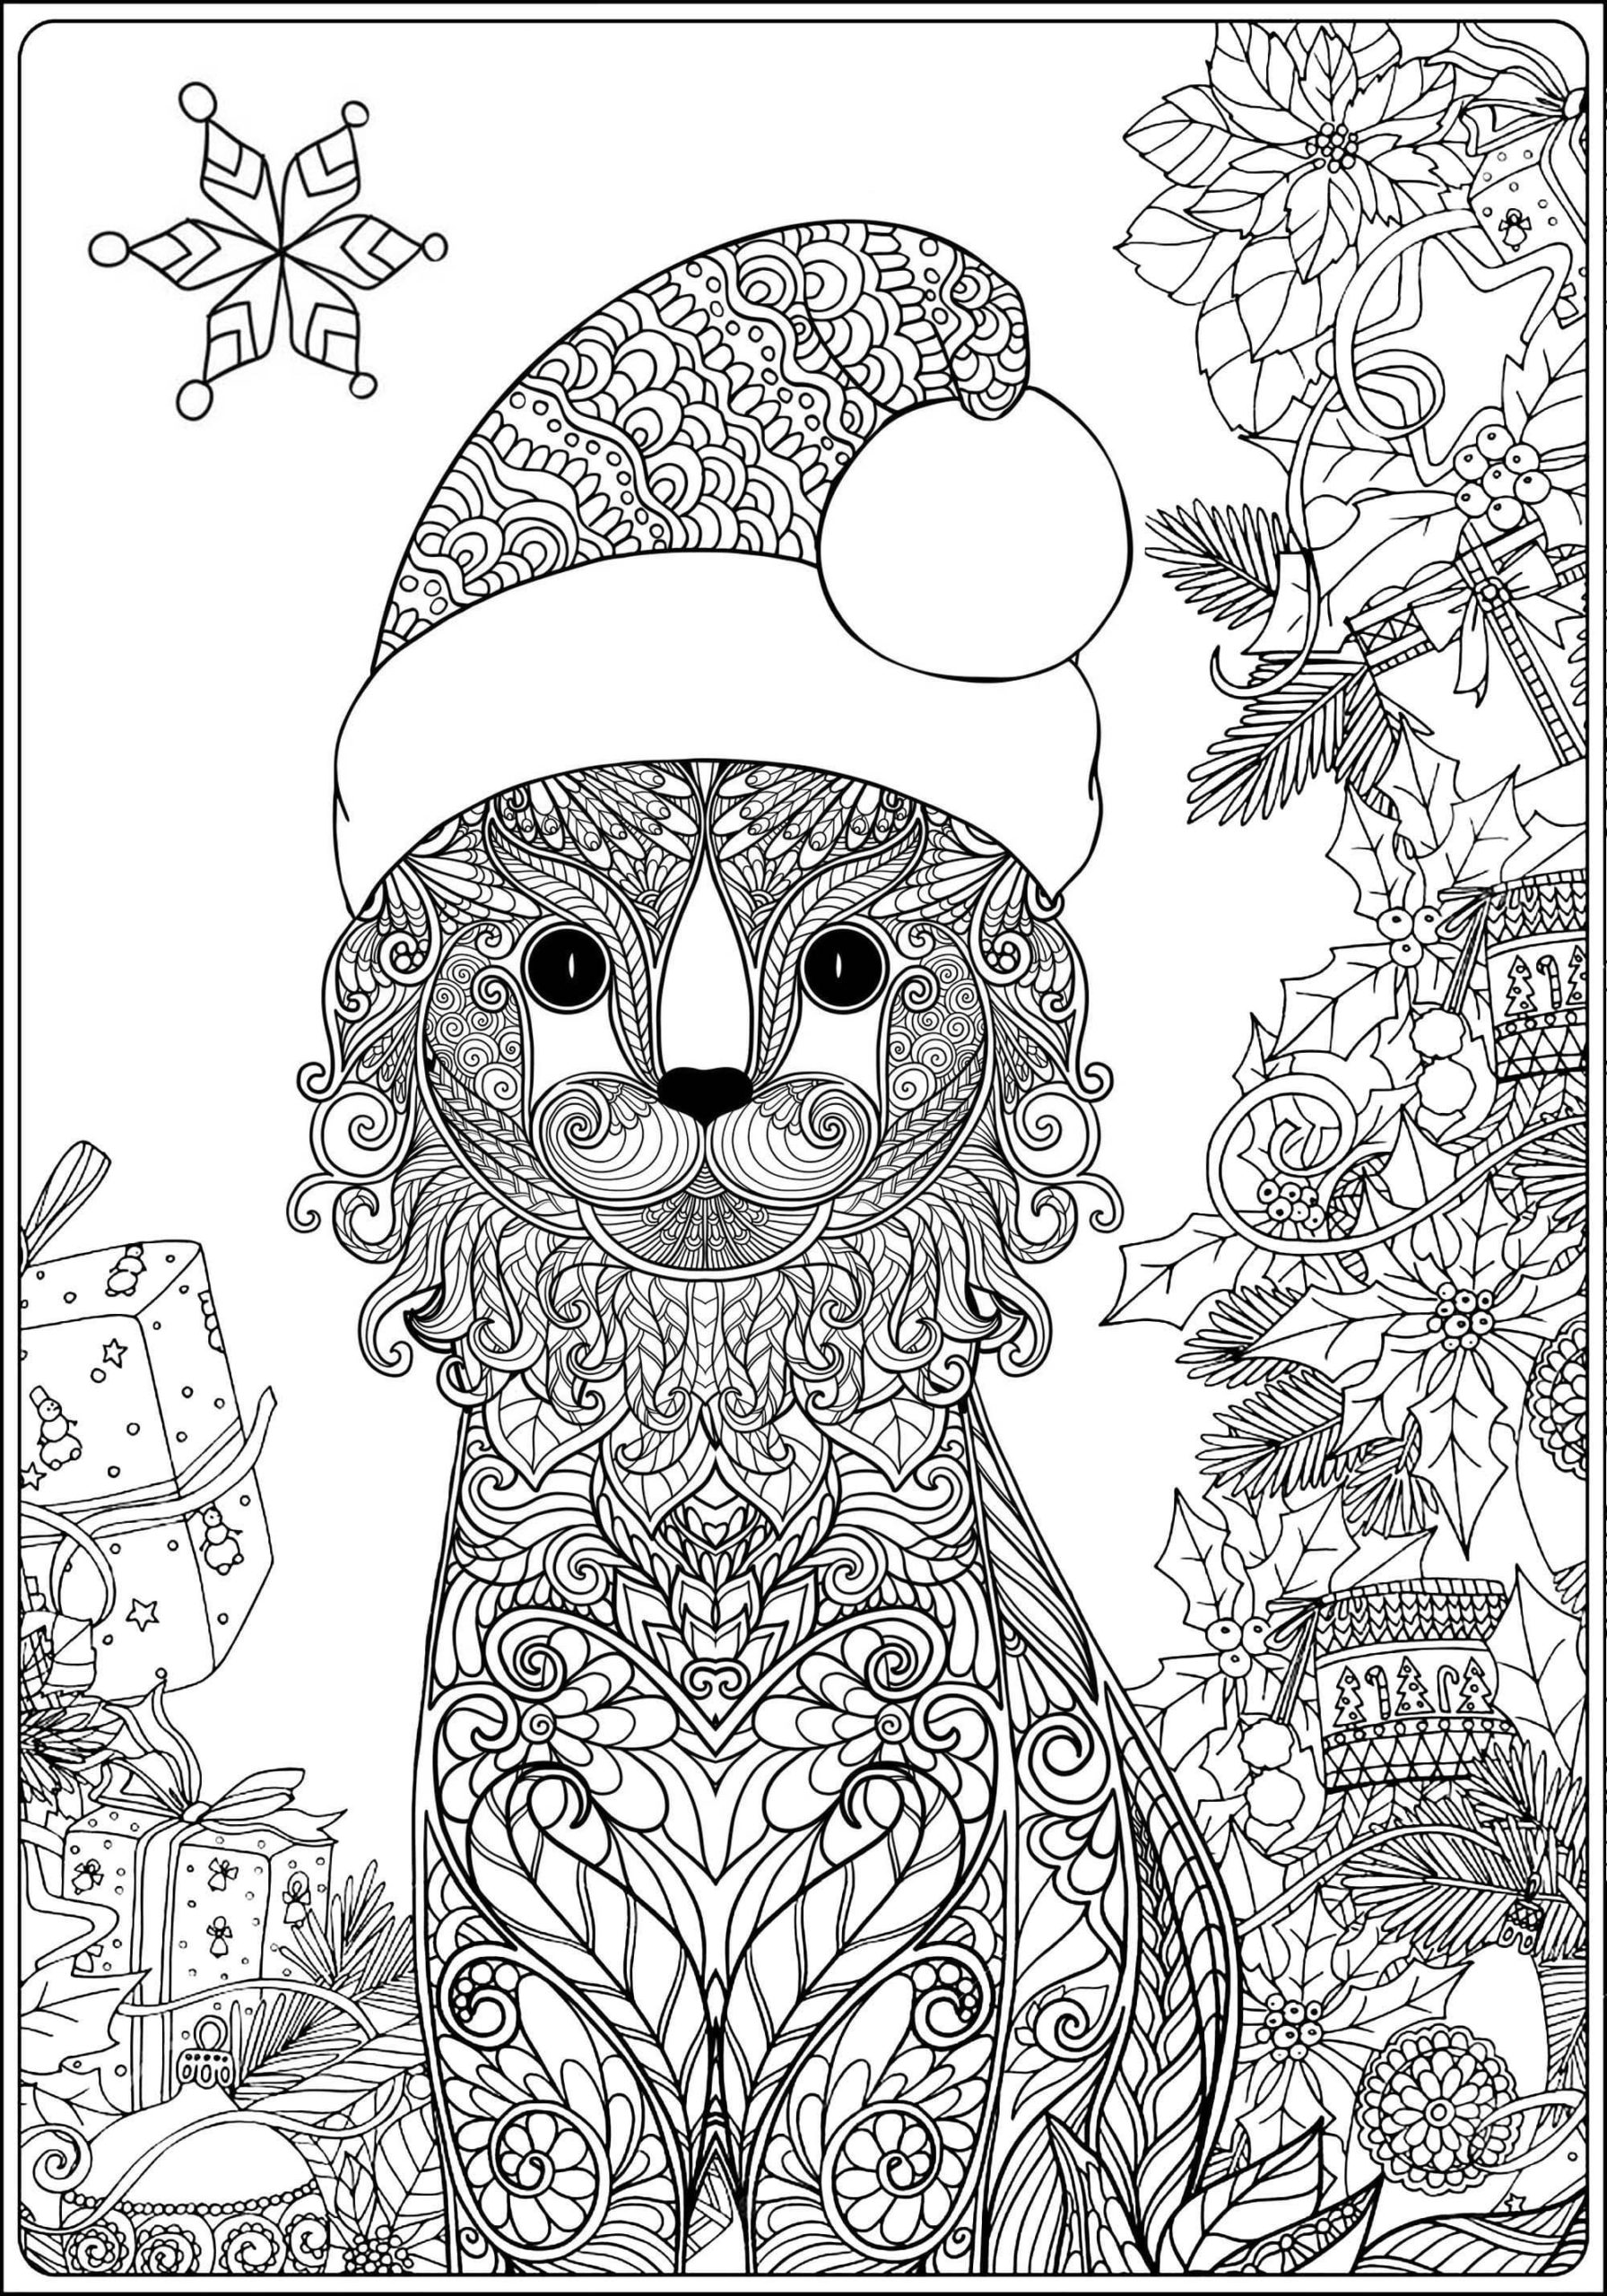 Festive Kitten in A hat Coloring Page